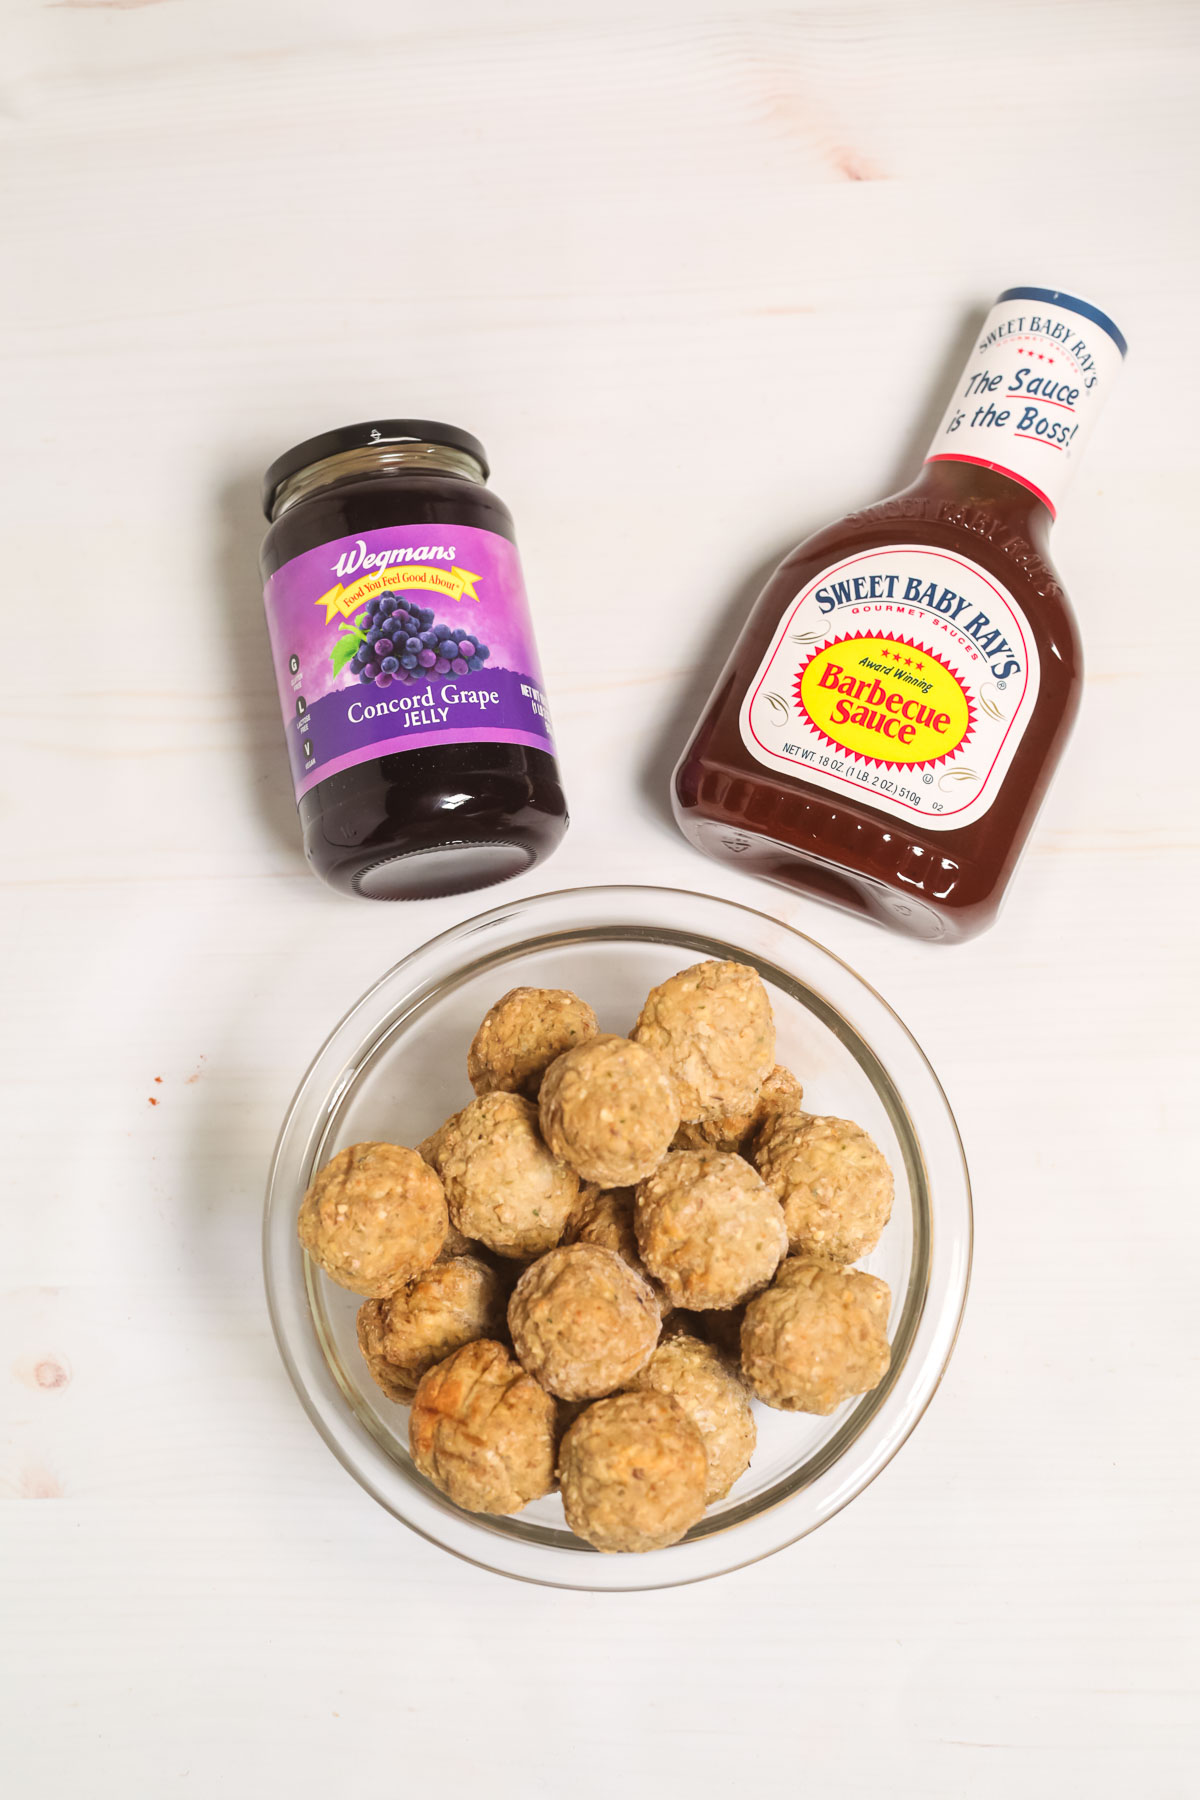 Barbeque sauce. jelly and meatballs.